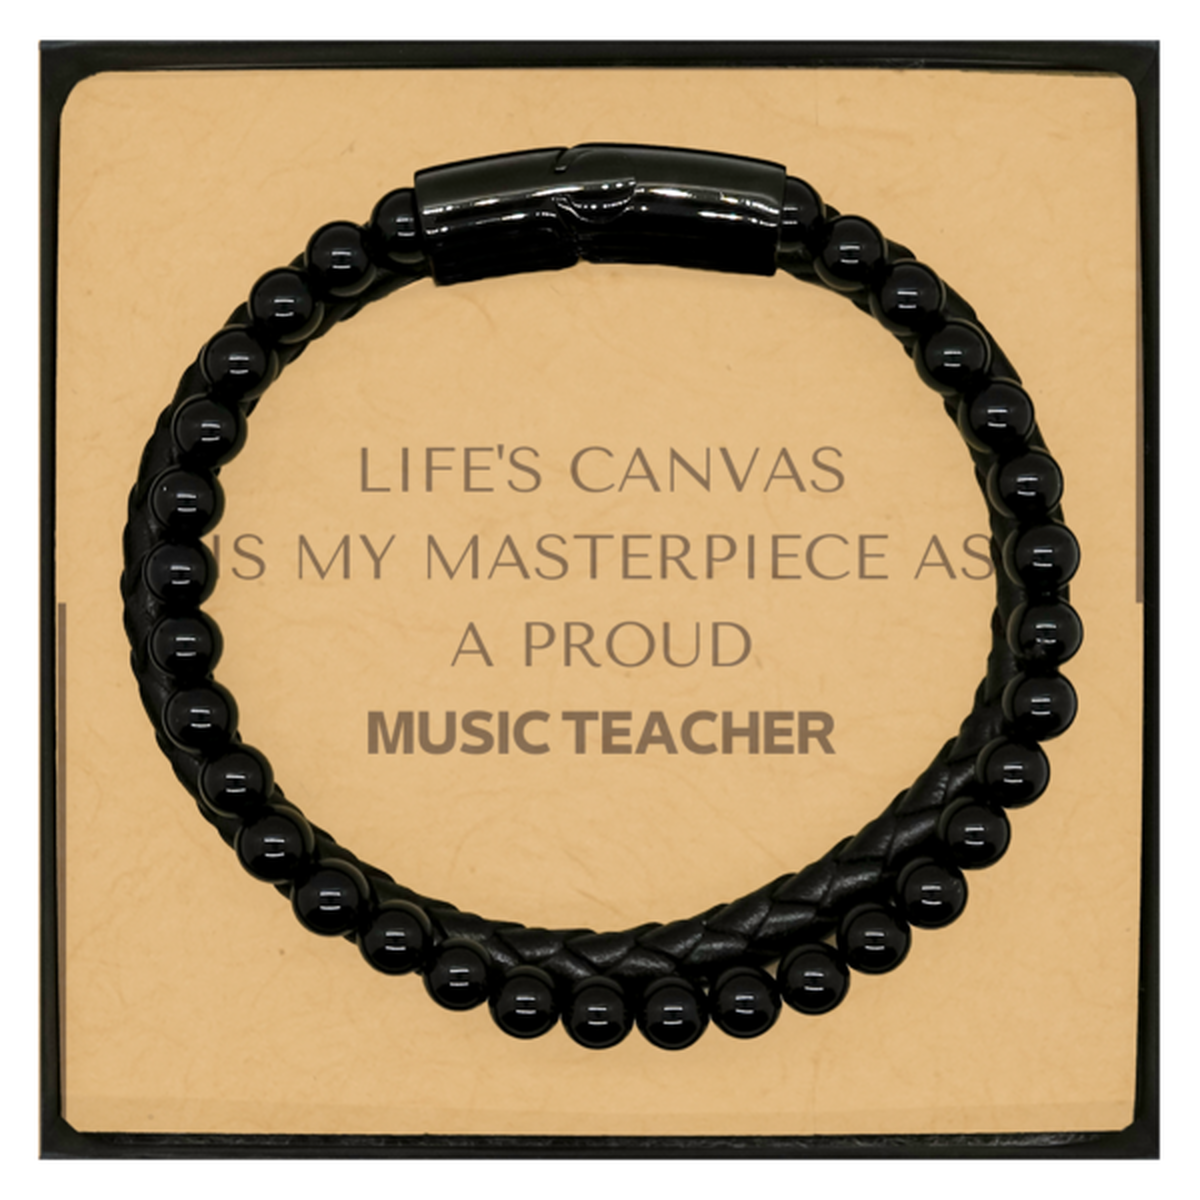 Proud Music Teacher Gifts, Life's canvas is my masterpiece, Epic Birthday Christmas Unique Stone Leather Bracelets For Music Teacher, Coworkers, Men, Women, Friends